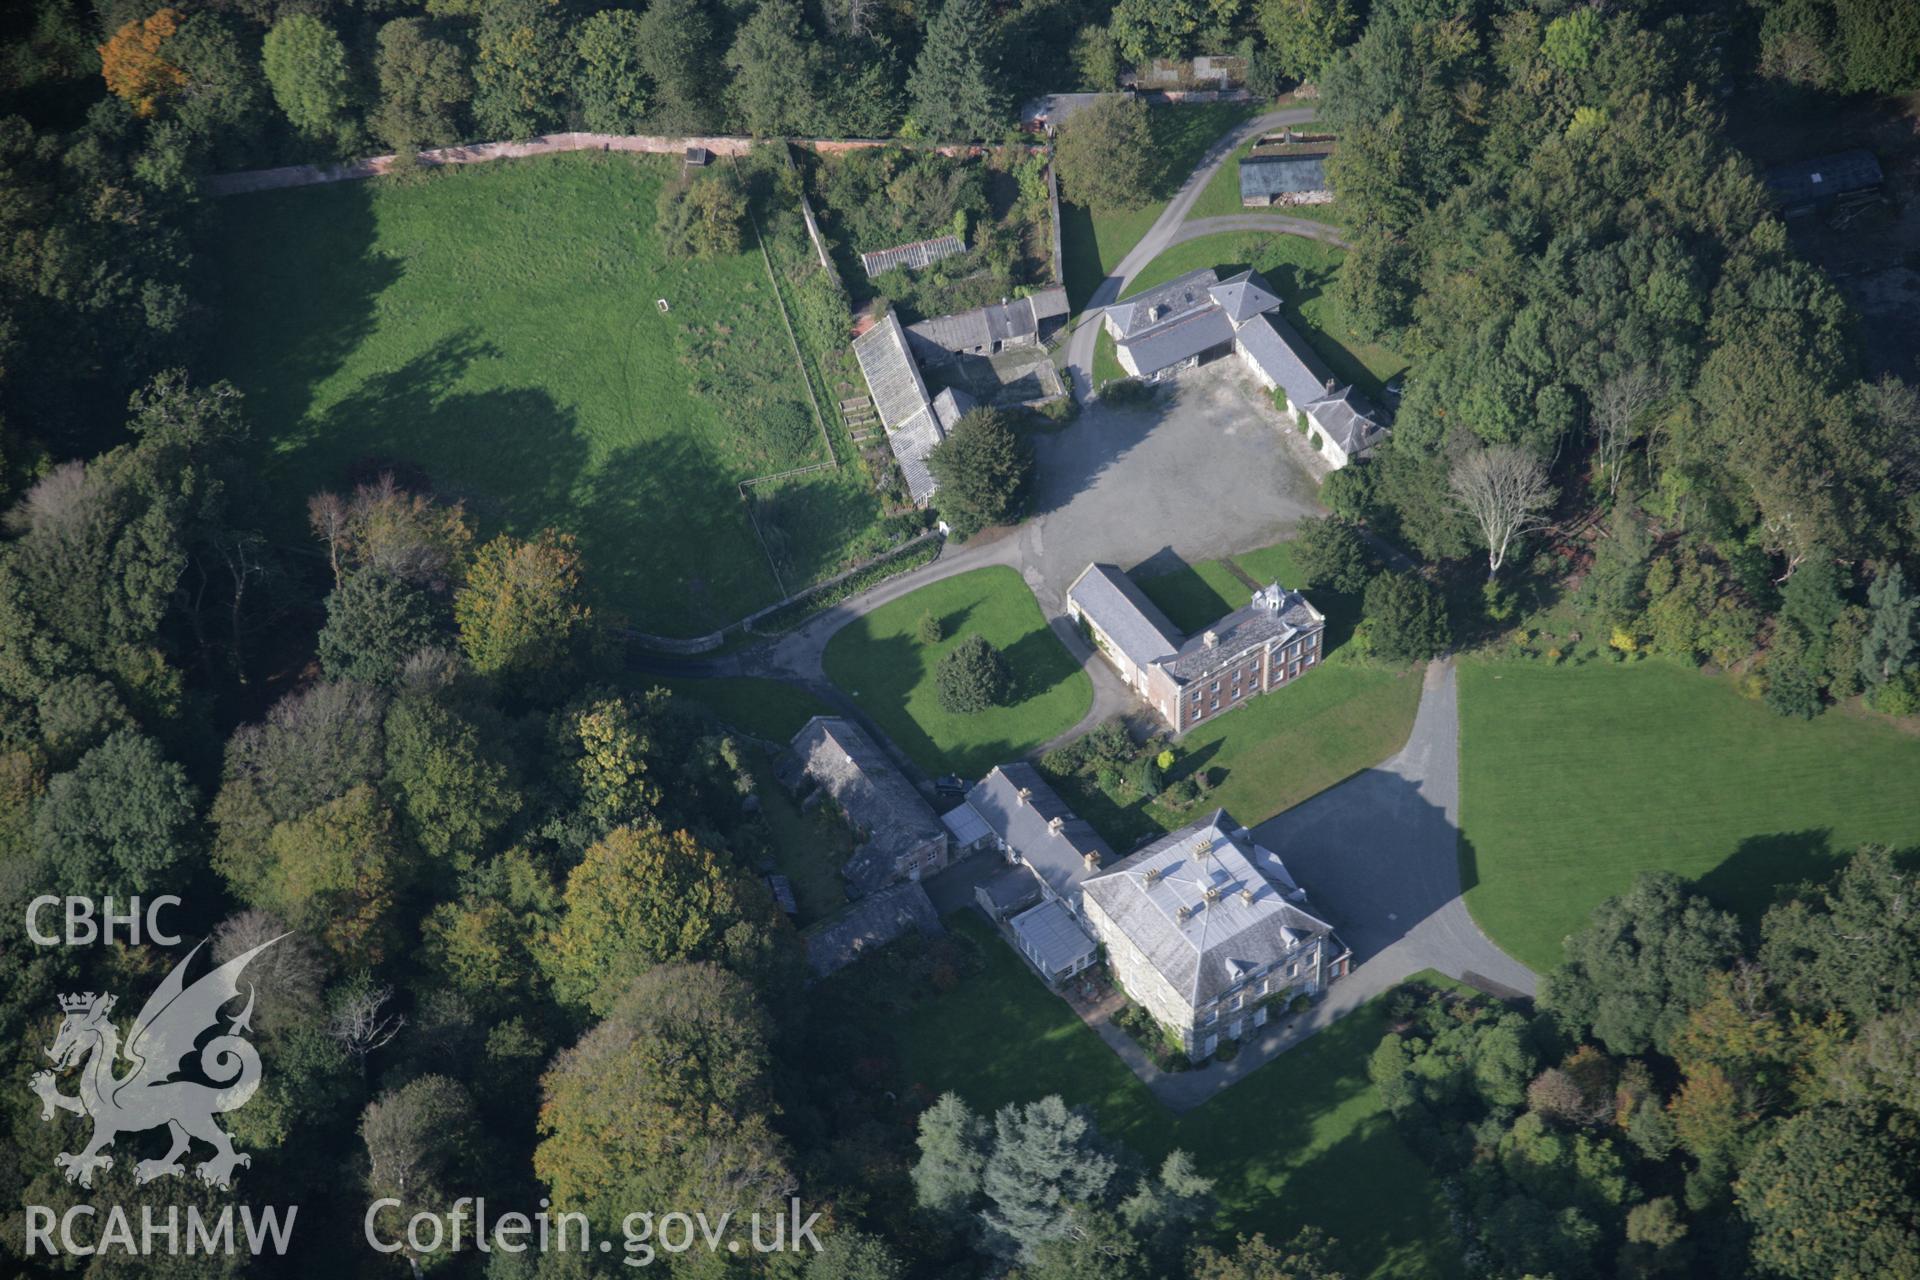 RCAHMW colour oblique aerial photograph of Peniarth Country House, viewed looking north. Taken on 17 October 2005 by Toby Driver